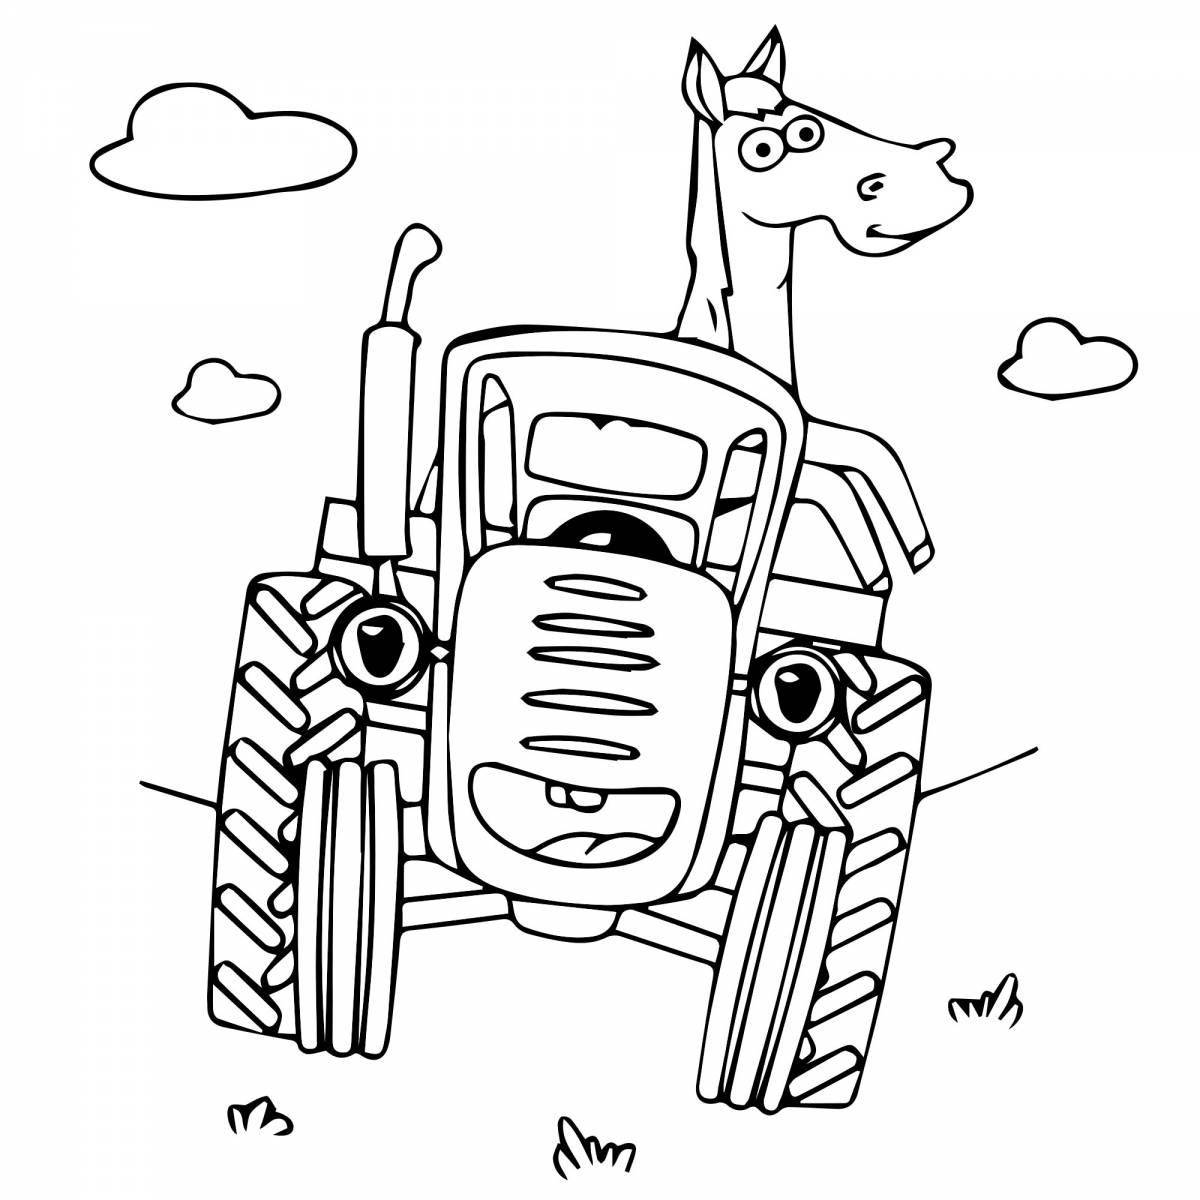 Superb baby blue tractor coloring page